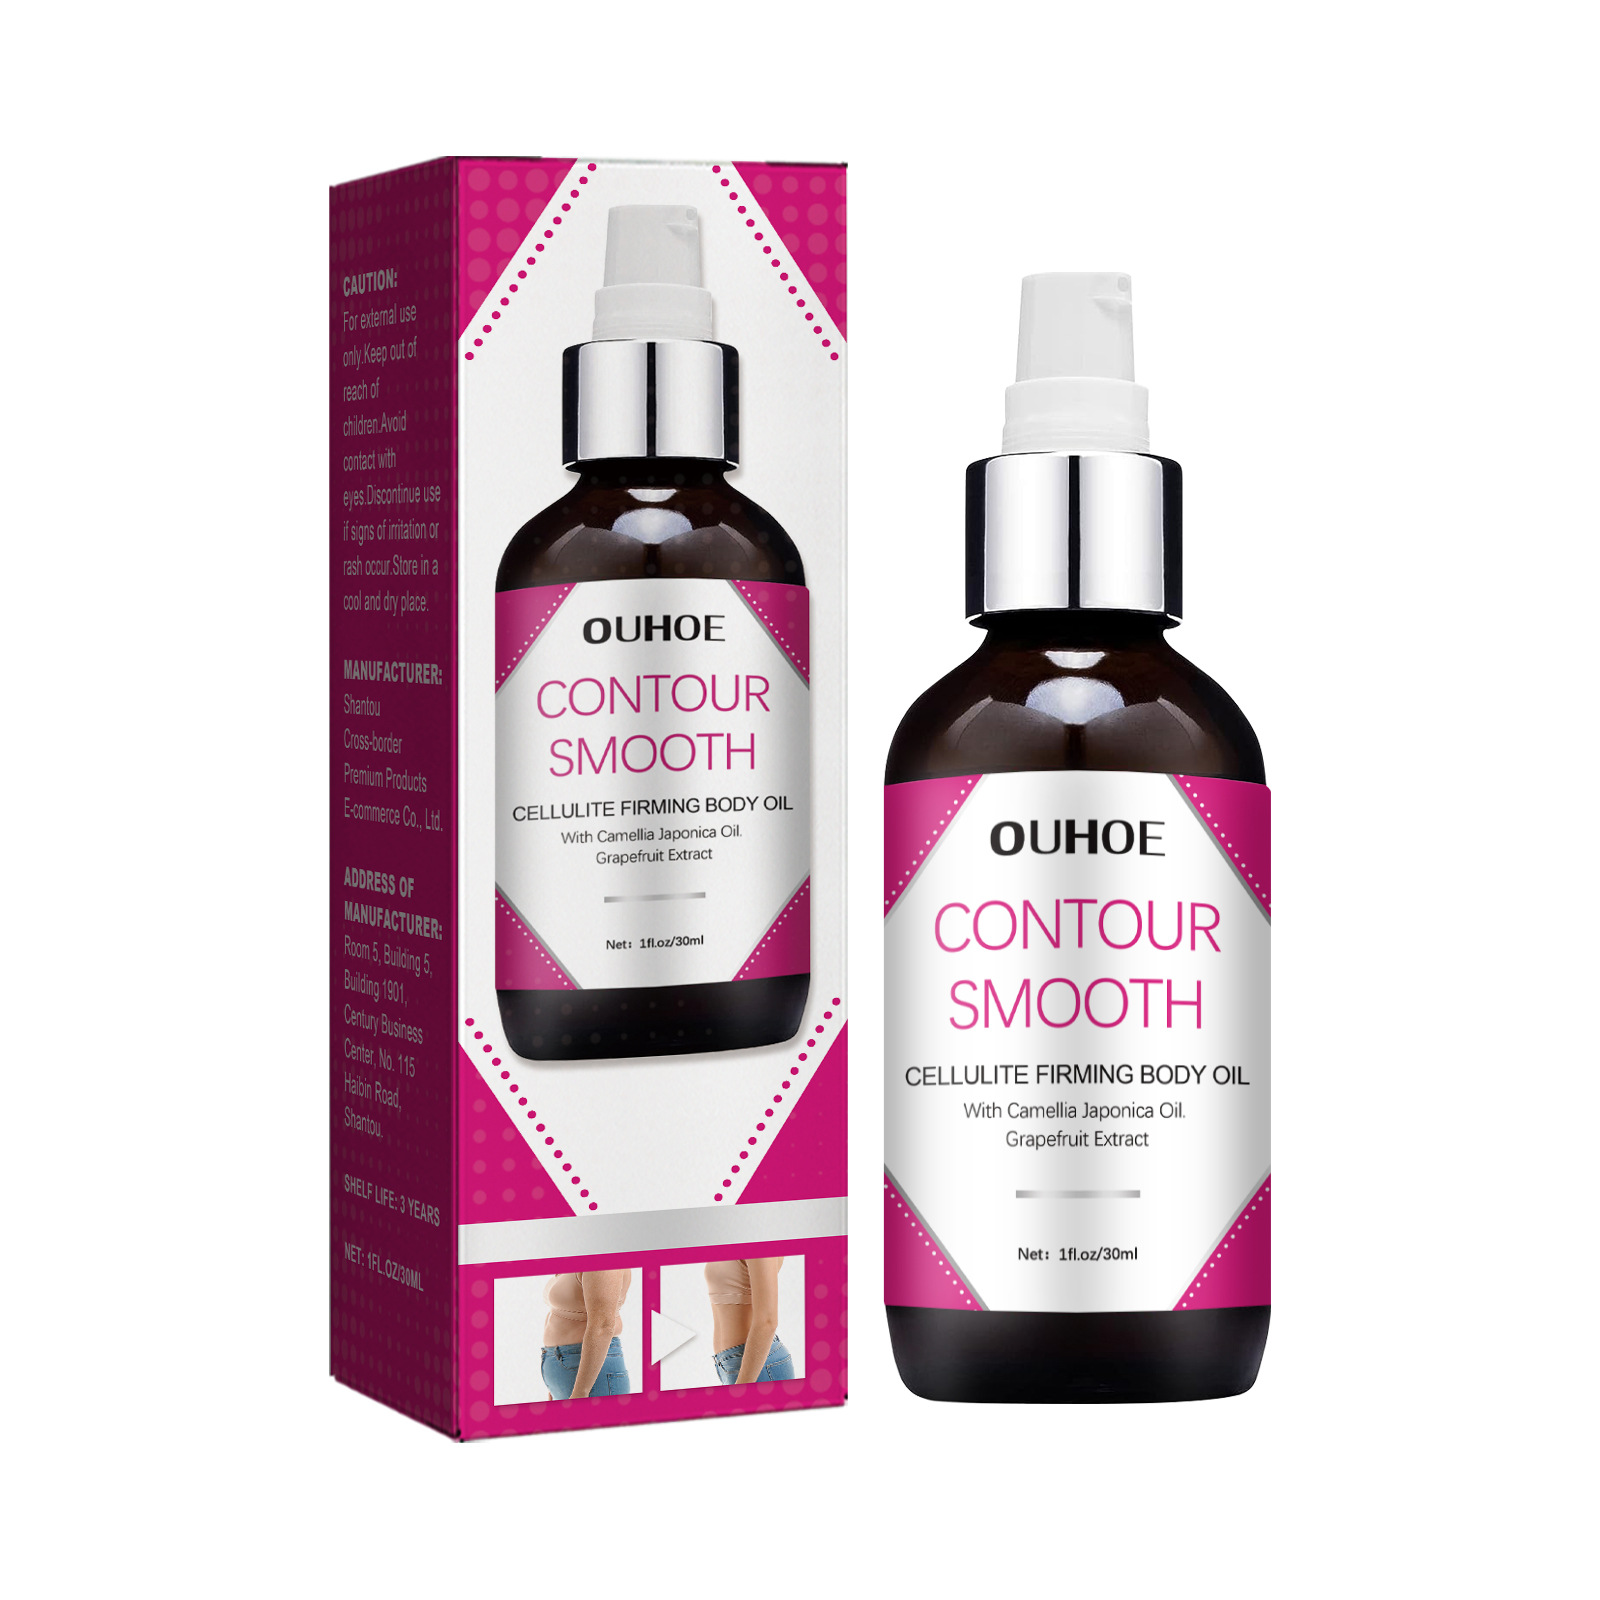 Ouhoe Compact Body Oil Body Body Oil